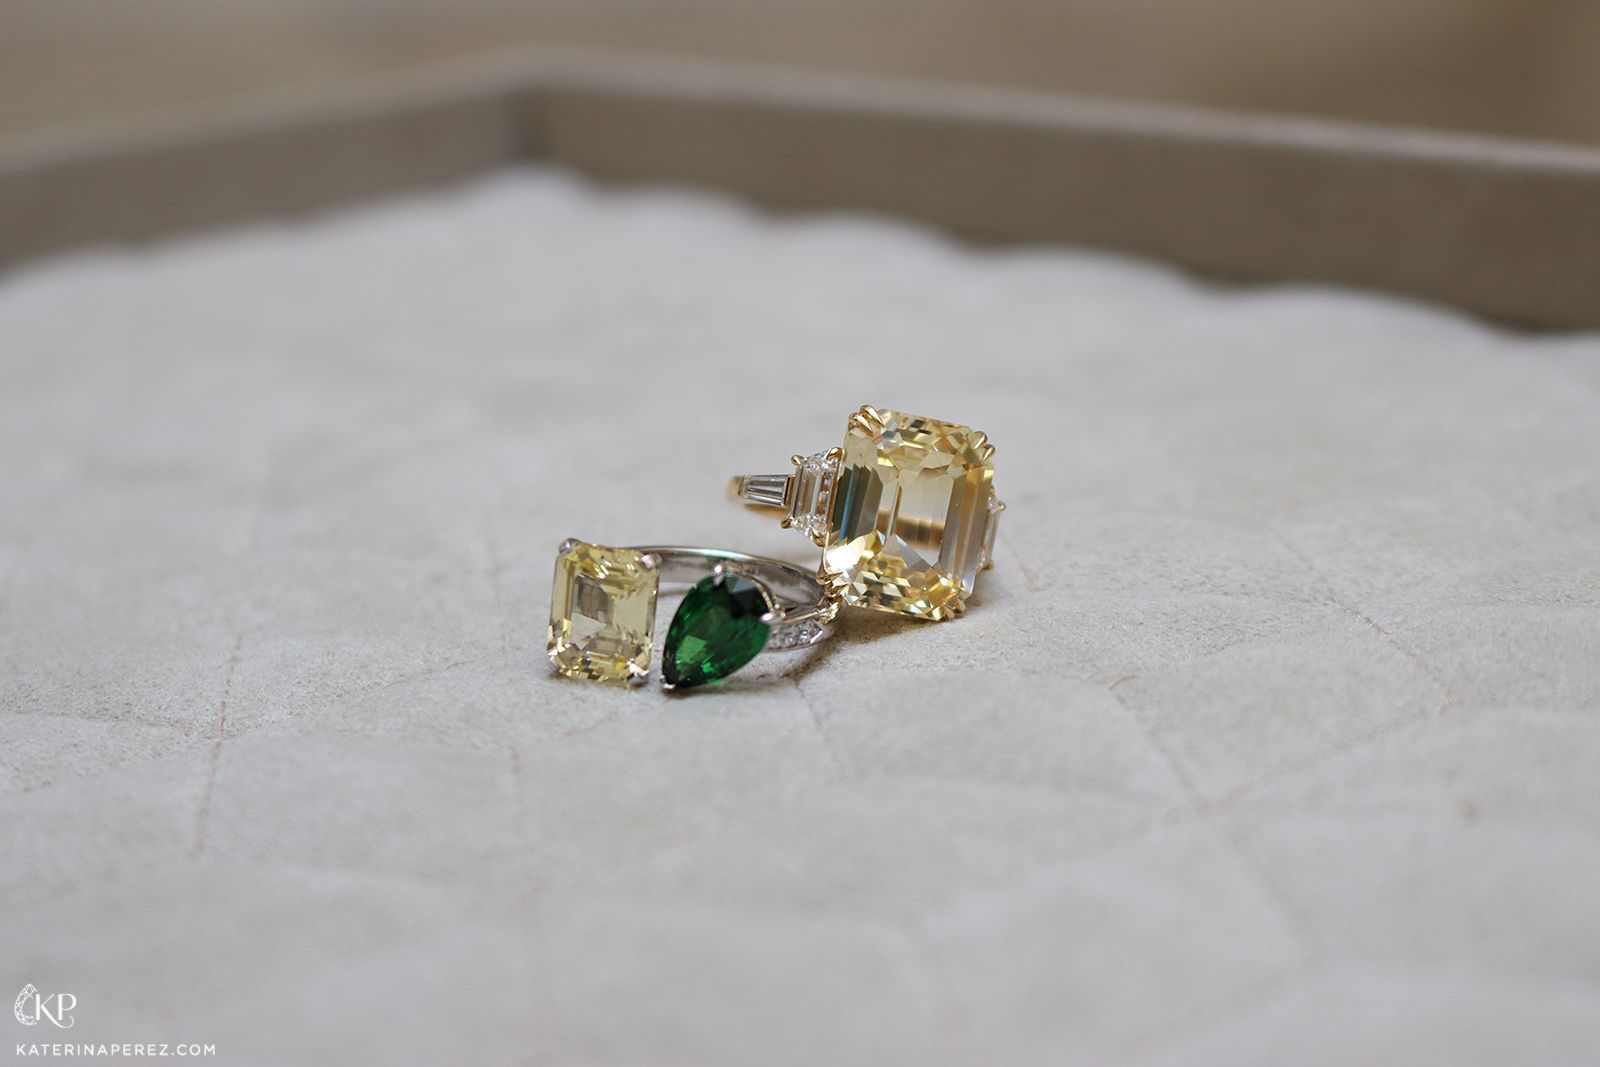 Maison Avani Toi et Moi ring with a 4.50 carat yellow sapphire and a 2.15 carat pear-shaped tsavorite alongside a yellow sapphire ring